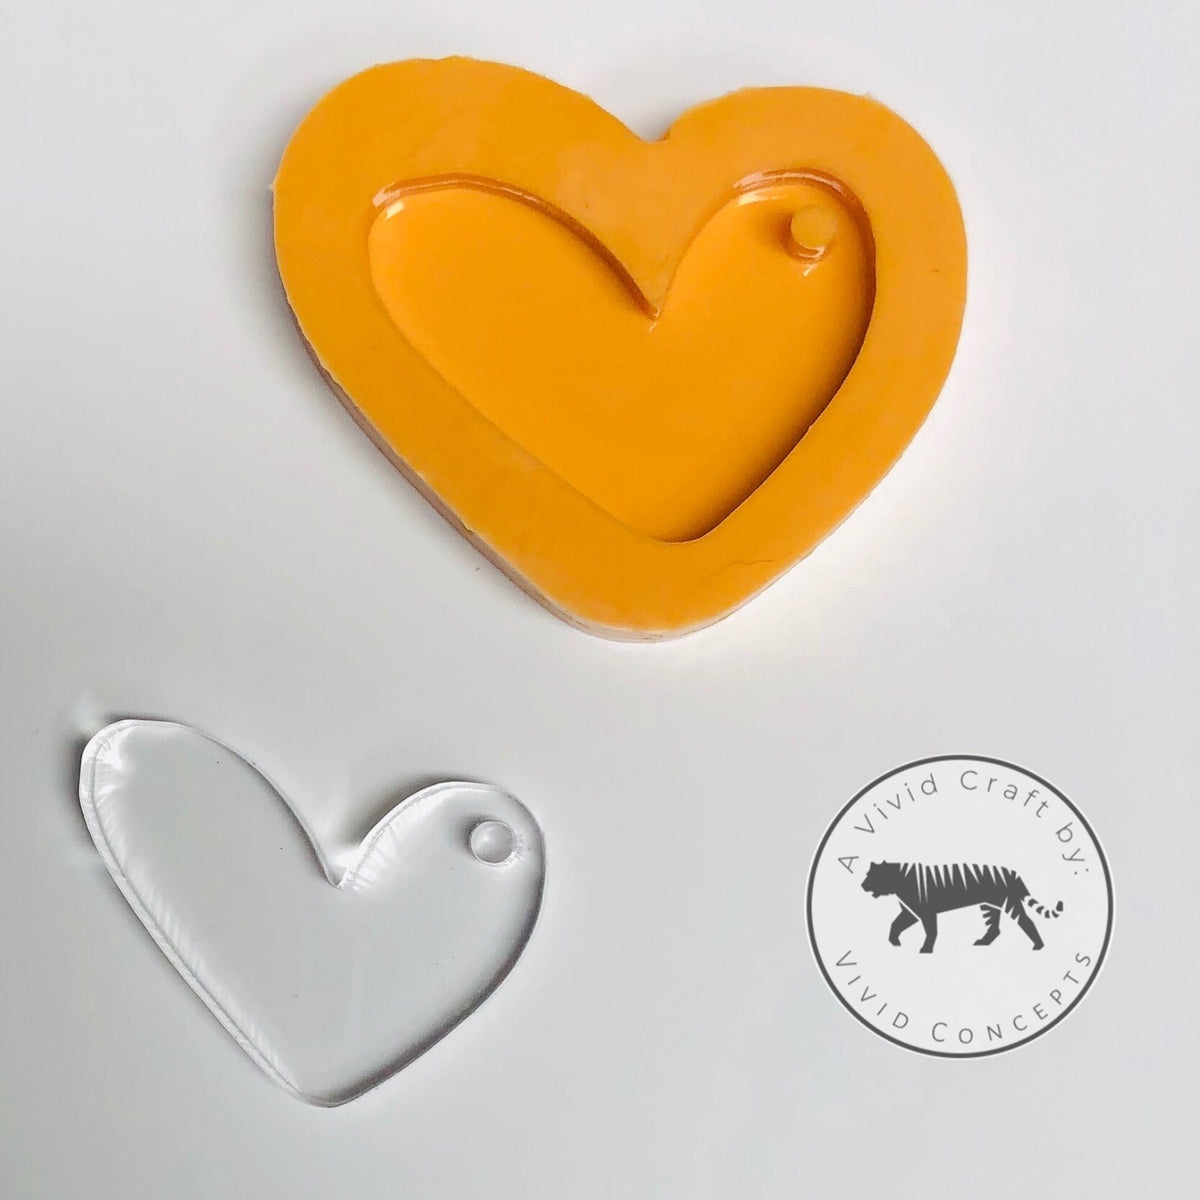 2 Hollow Heart Silicone Mold – The Crafts and Glitter Shop